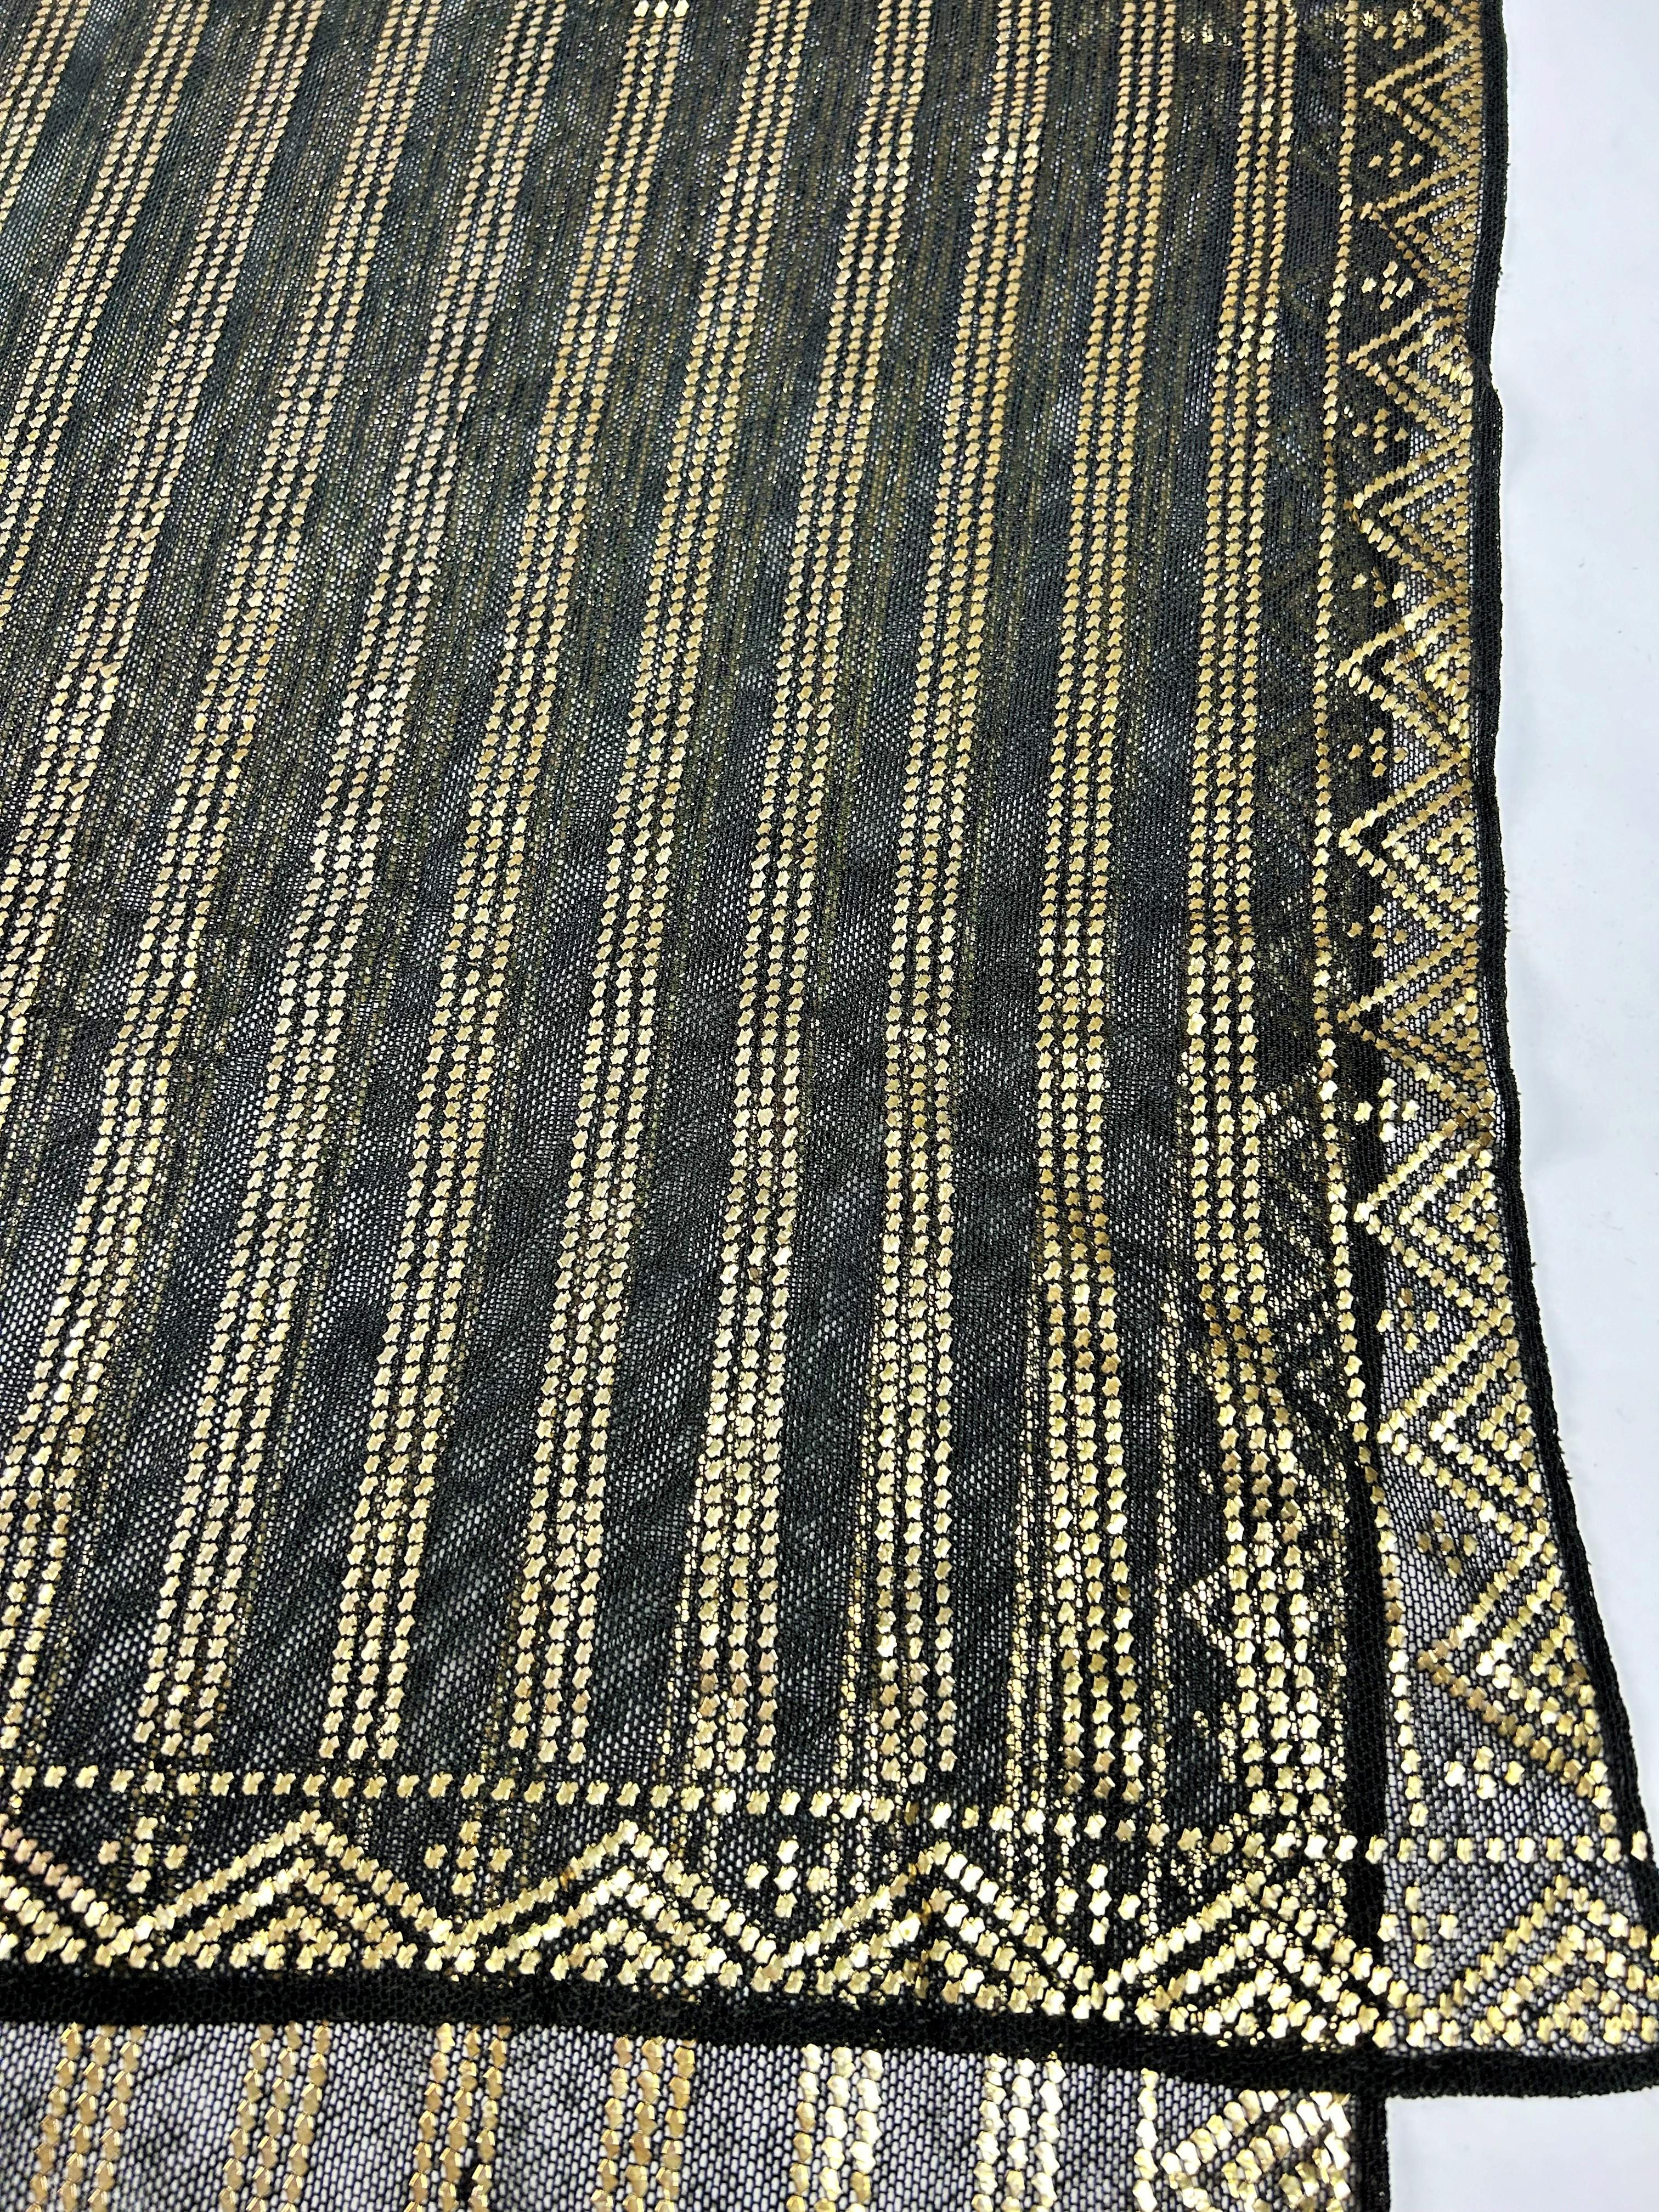 Assuit shawl in cotton voile and gilded metal strips - Egypt Circa 1930-1940 For Sale 9